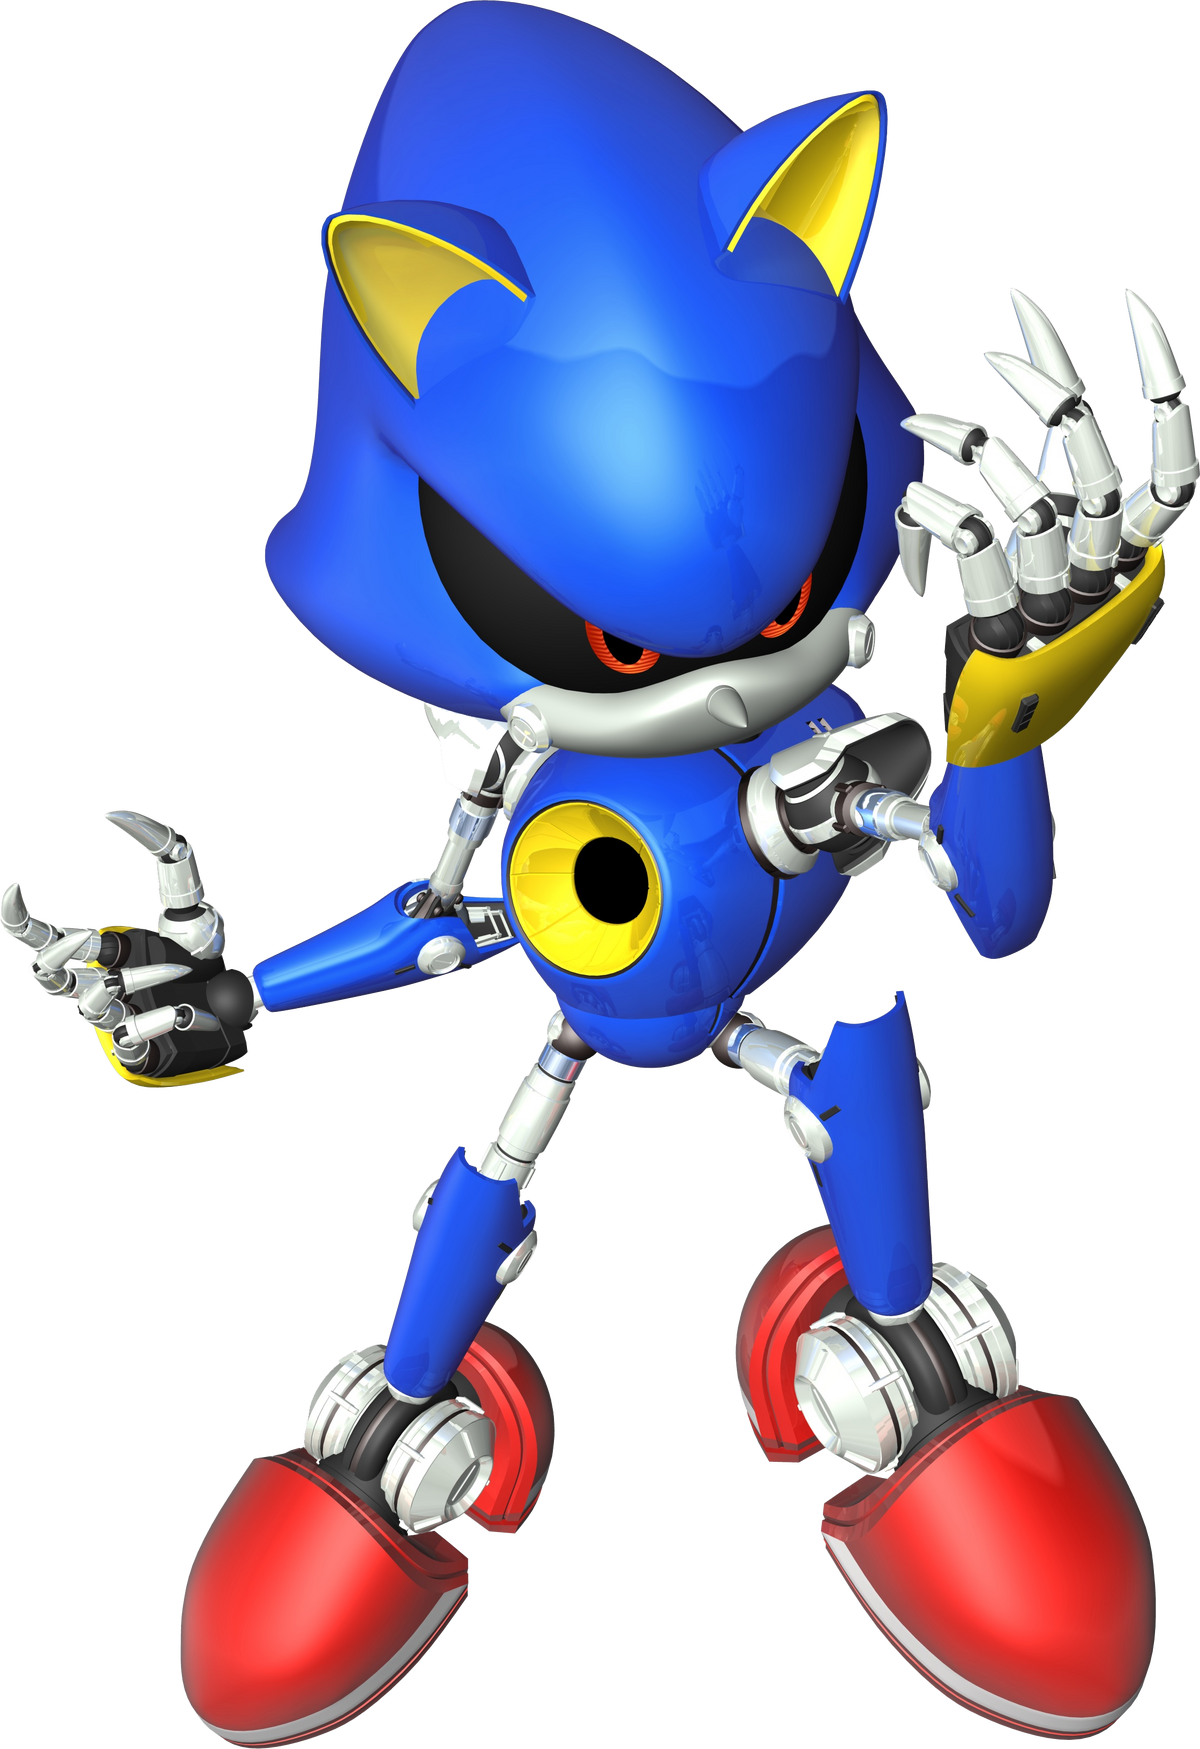 Freedom Planet Sonic The Hedgehog Metal Sonic PNG, Clipart, Art